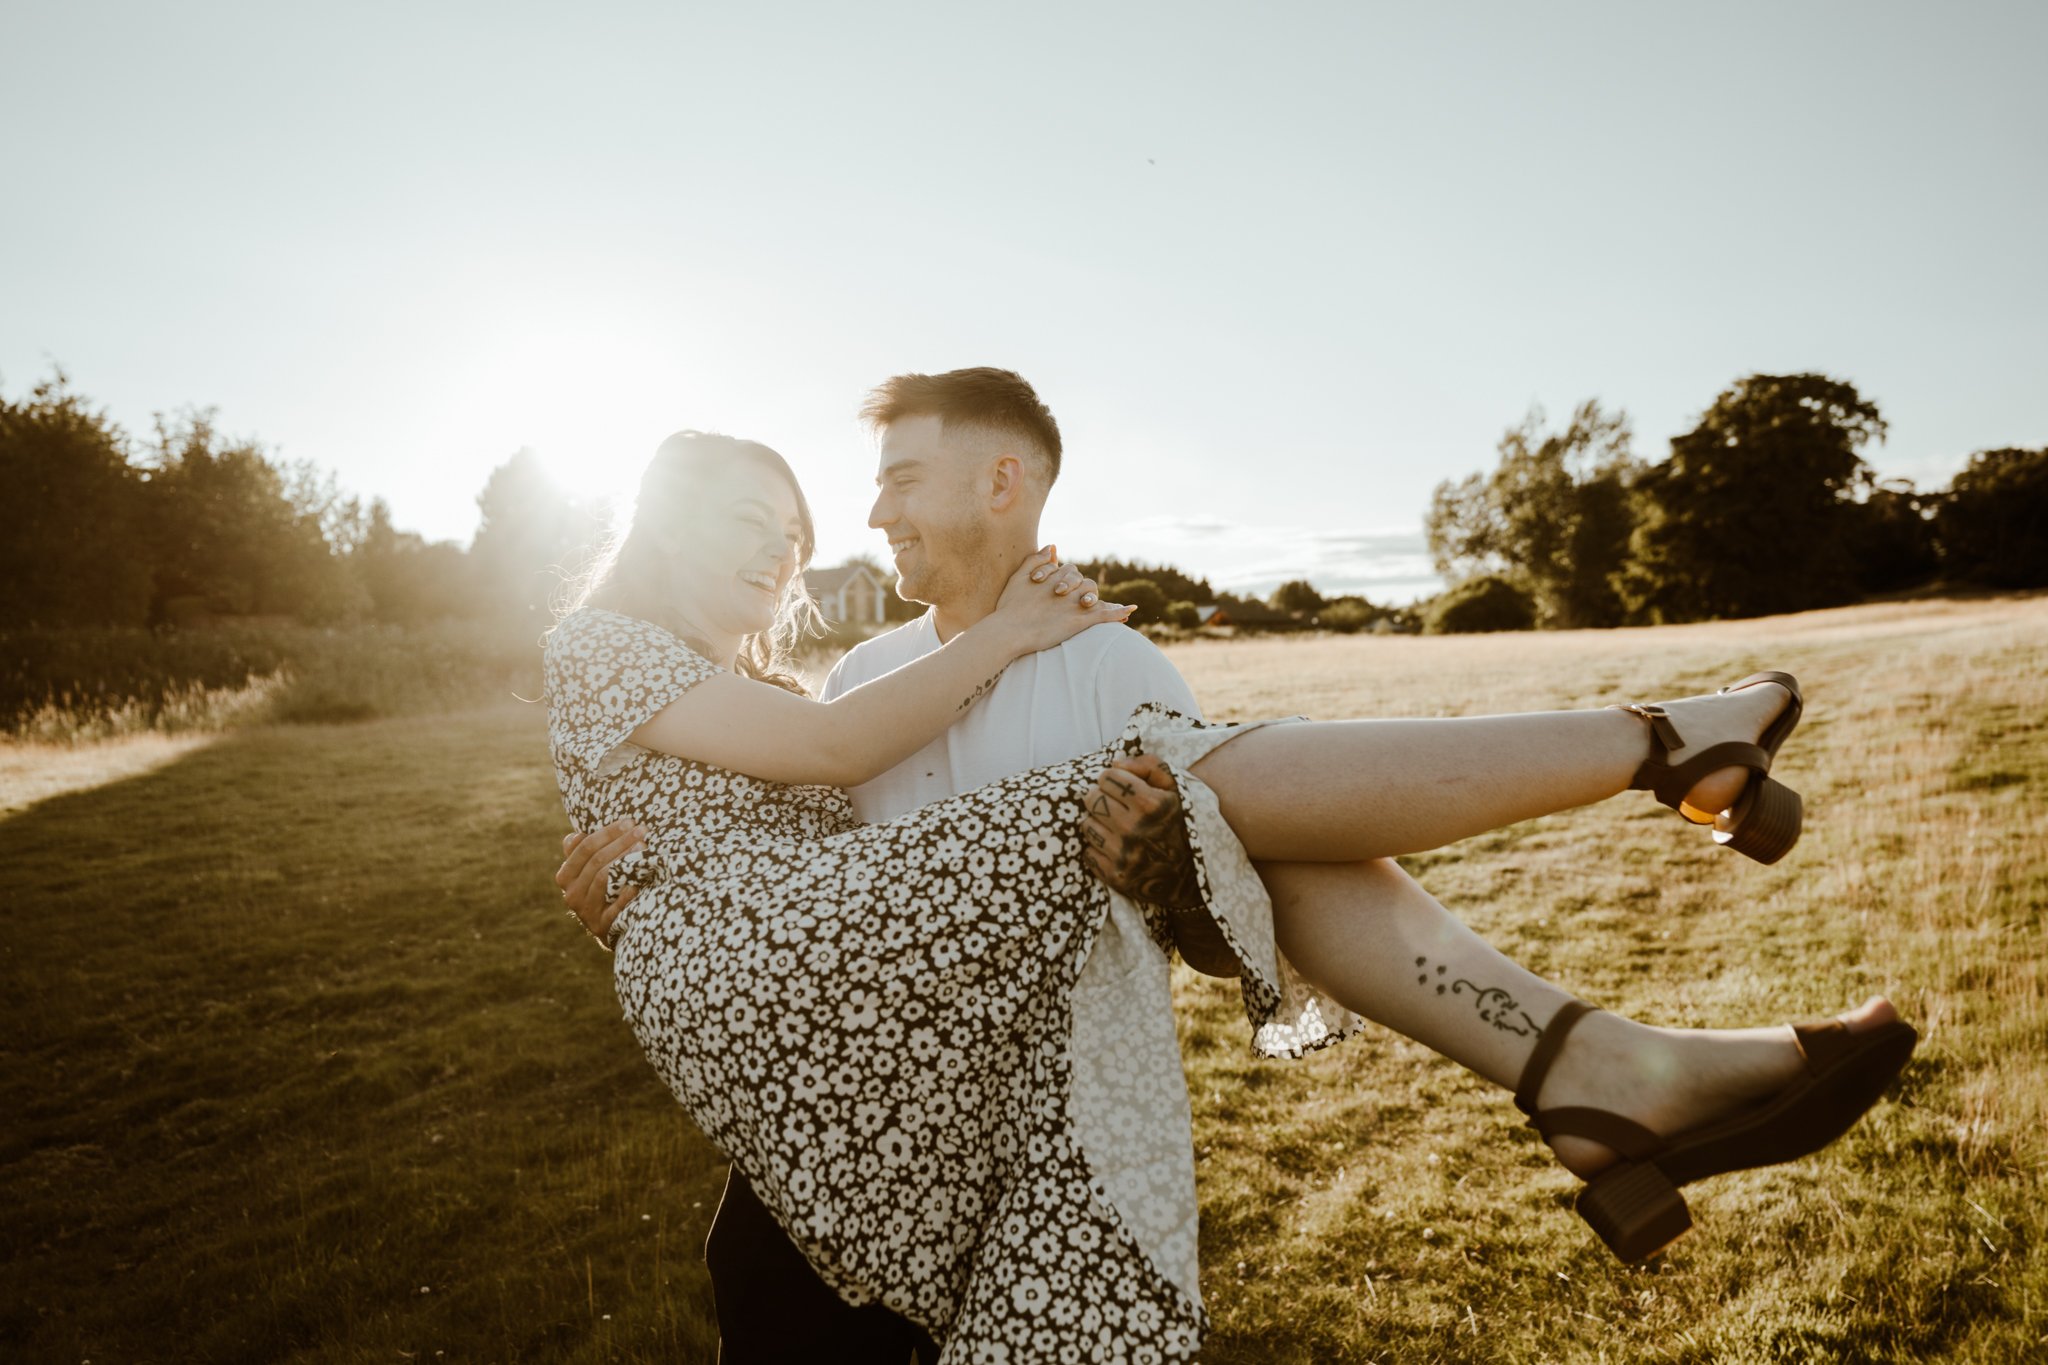 Angus Scotland Engagement and Wedding Photographer - Emily and Gabriel - Adventure Couple Session5.jpg